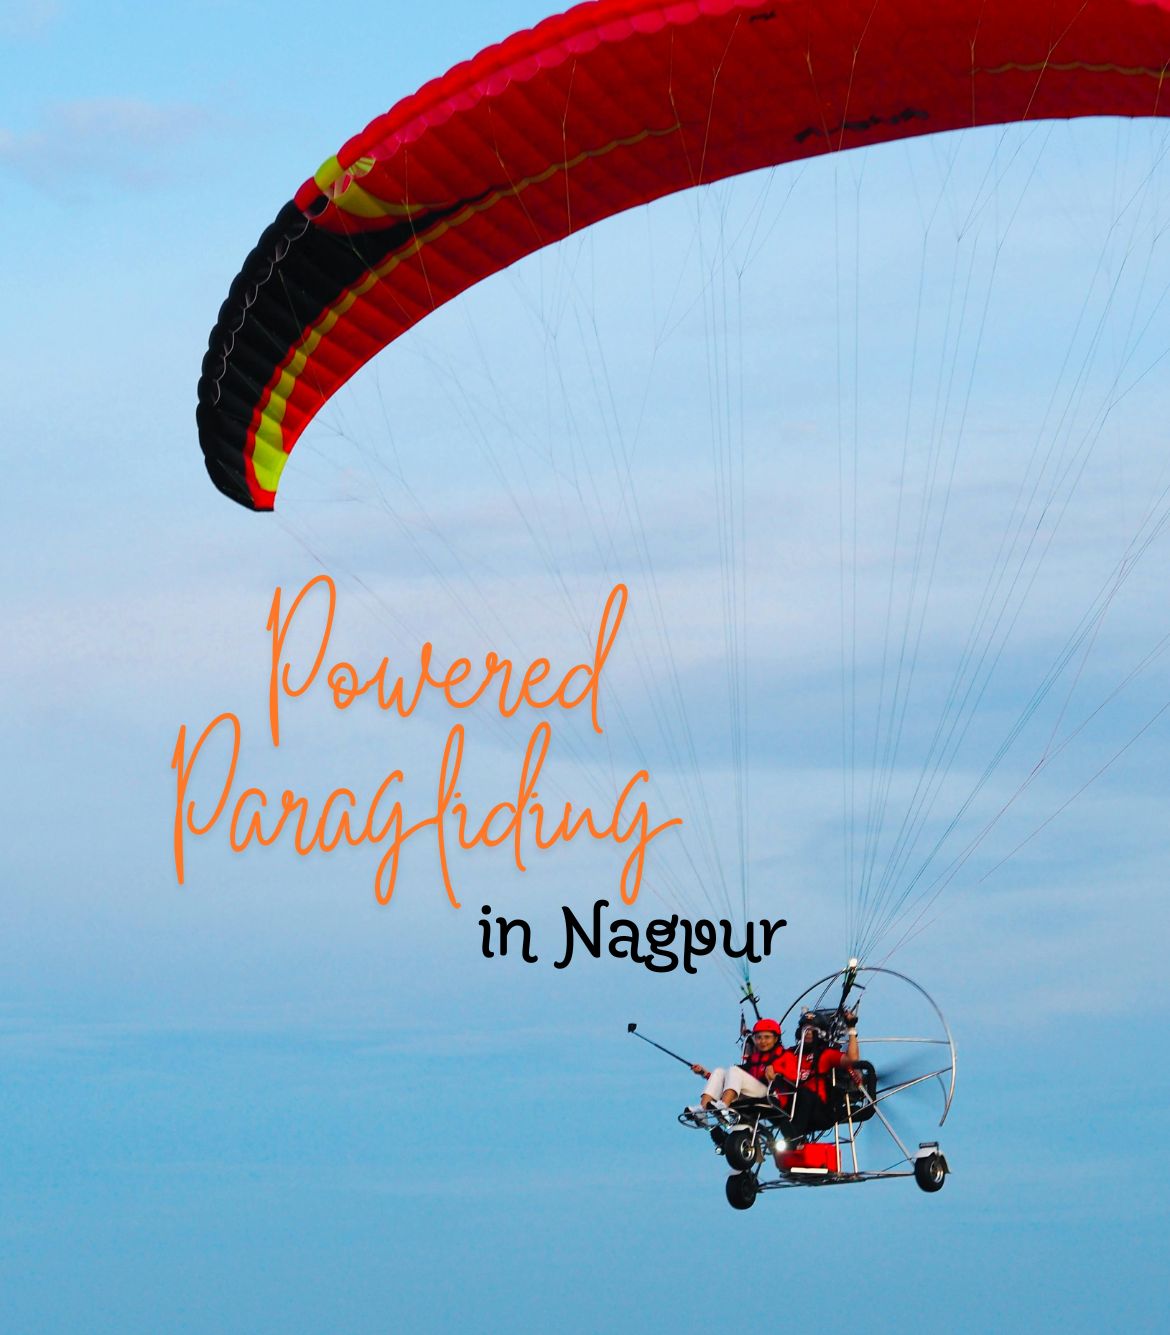 Powered Paragliding in Nagpur